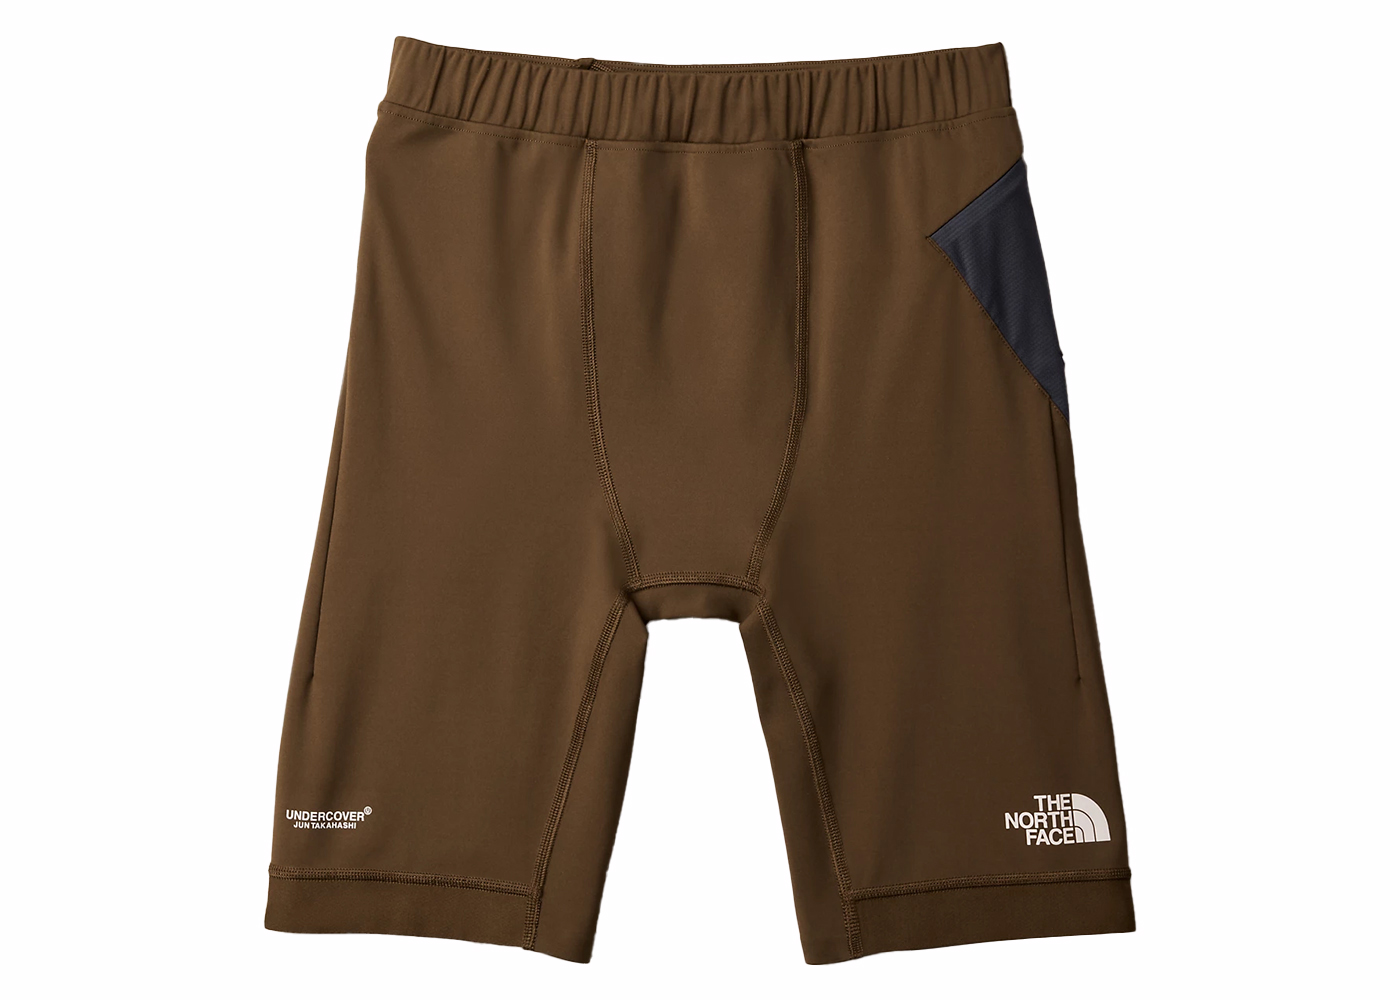 The North Face x Undercover Soukuu Trail Run Utility Short Tights 